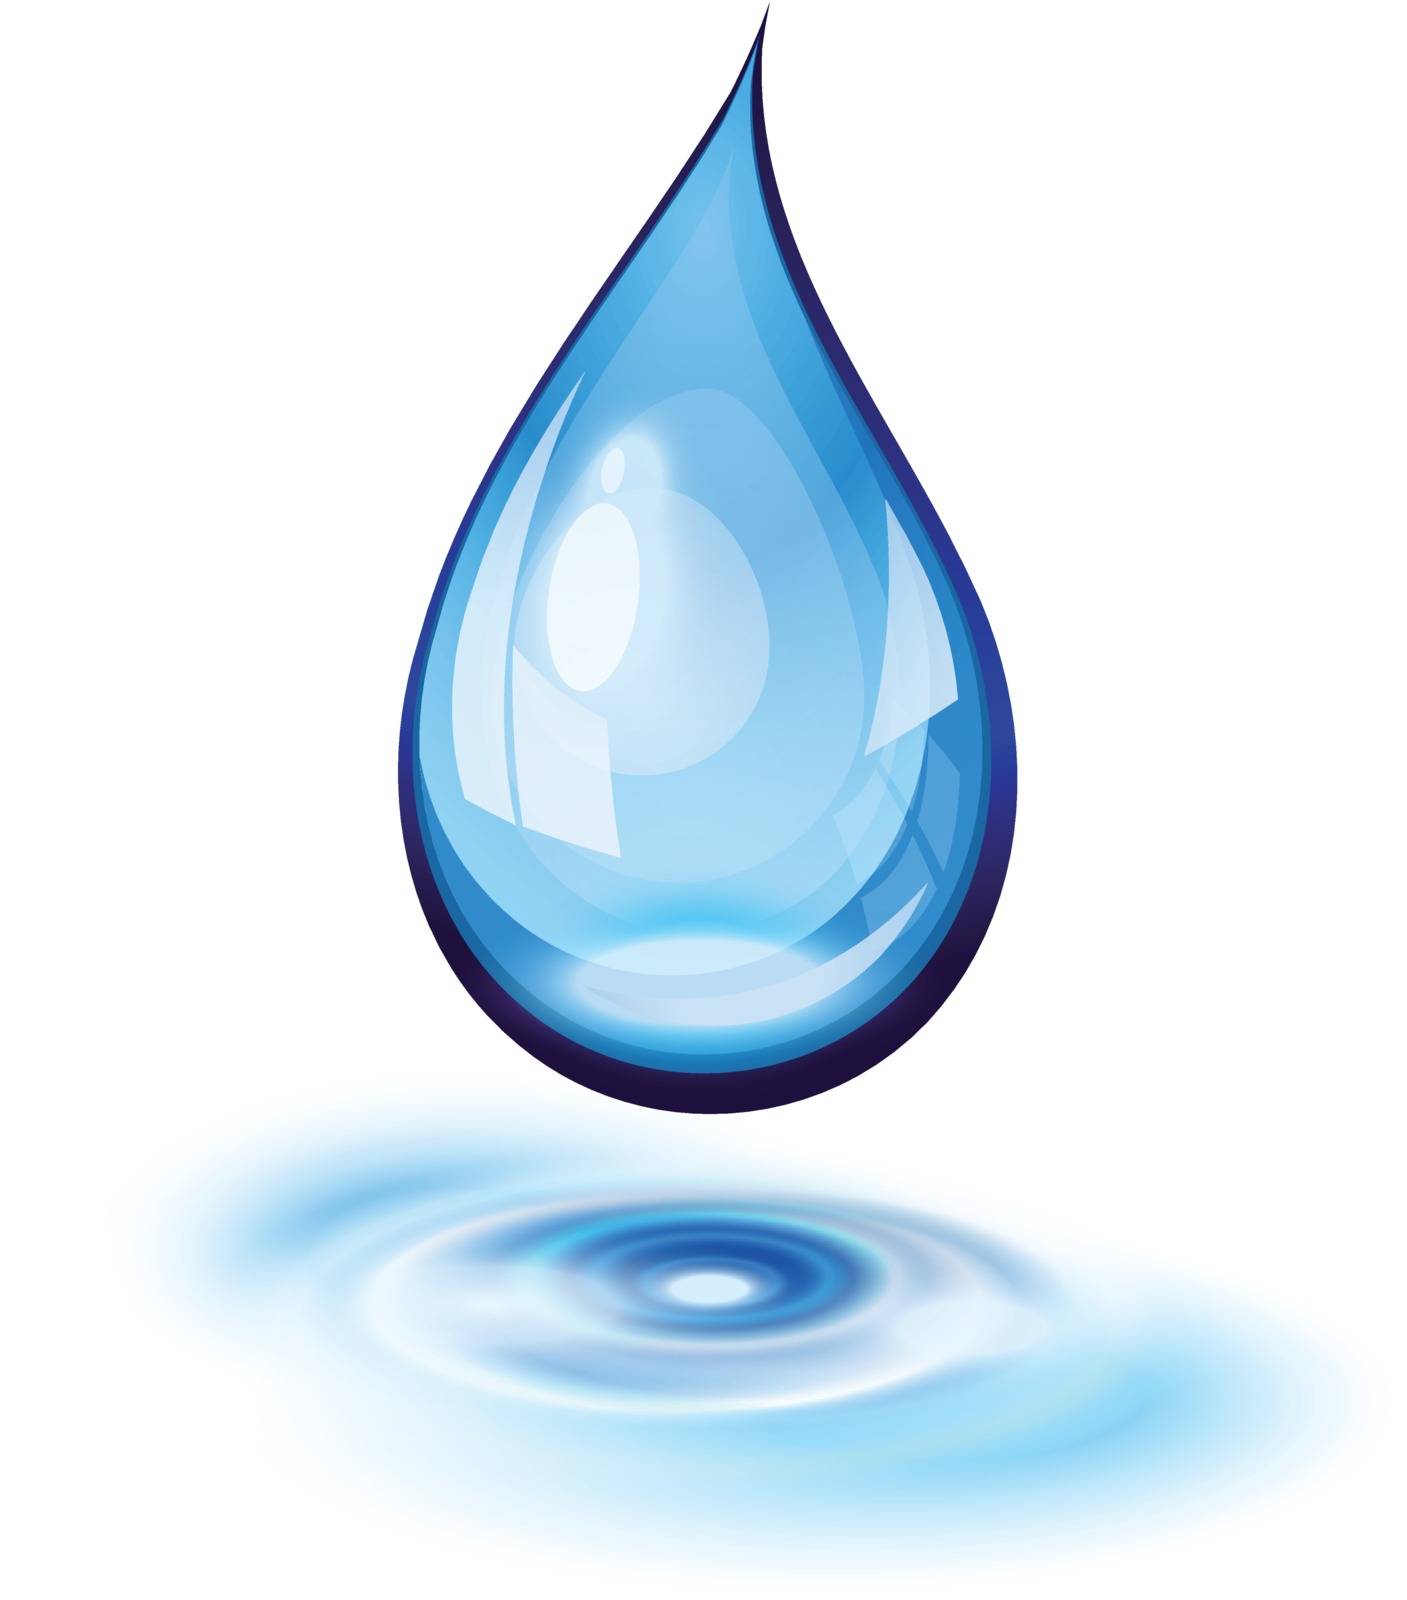 Water drop icon by Tilo